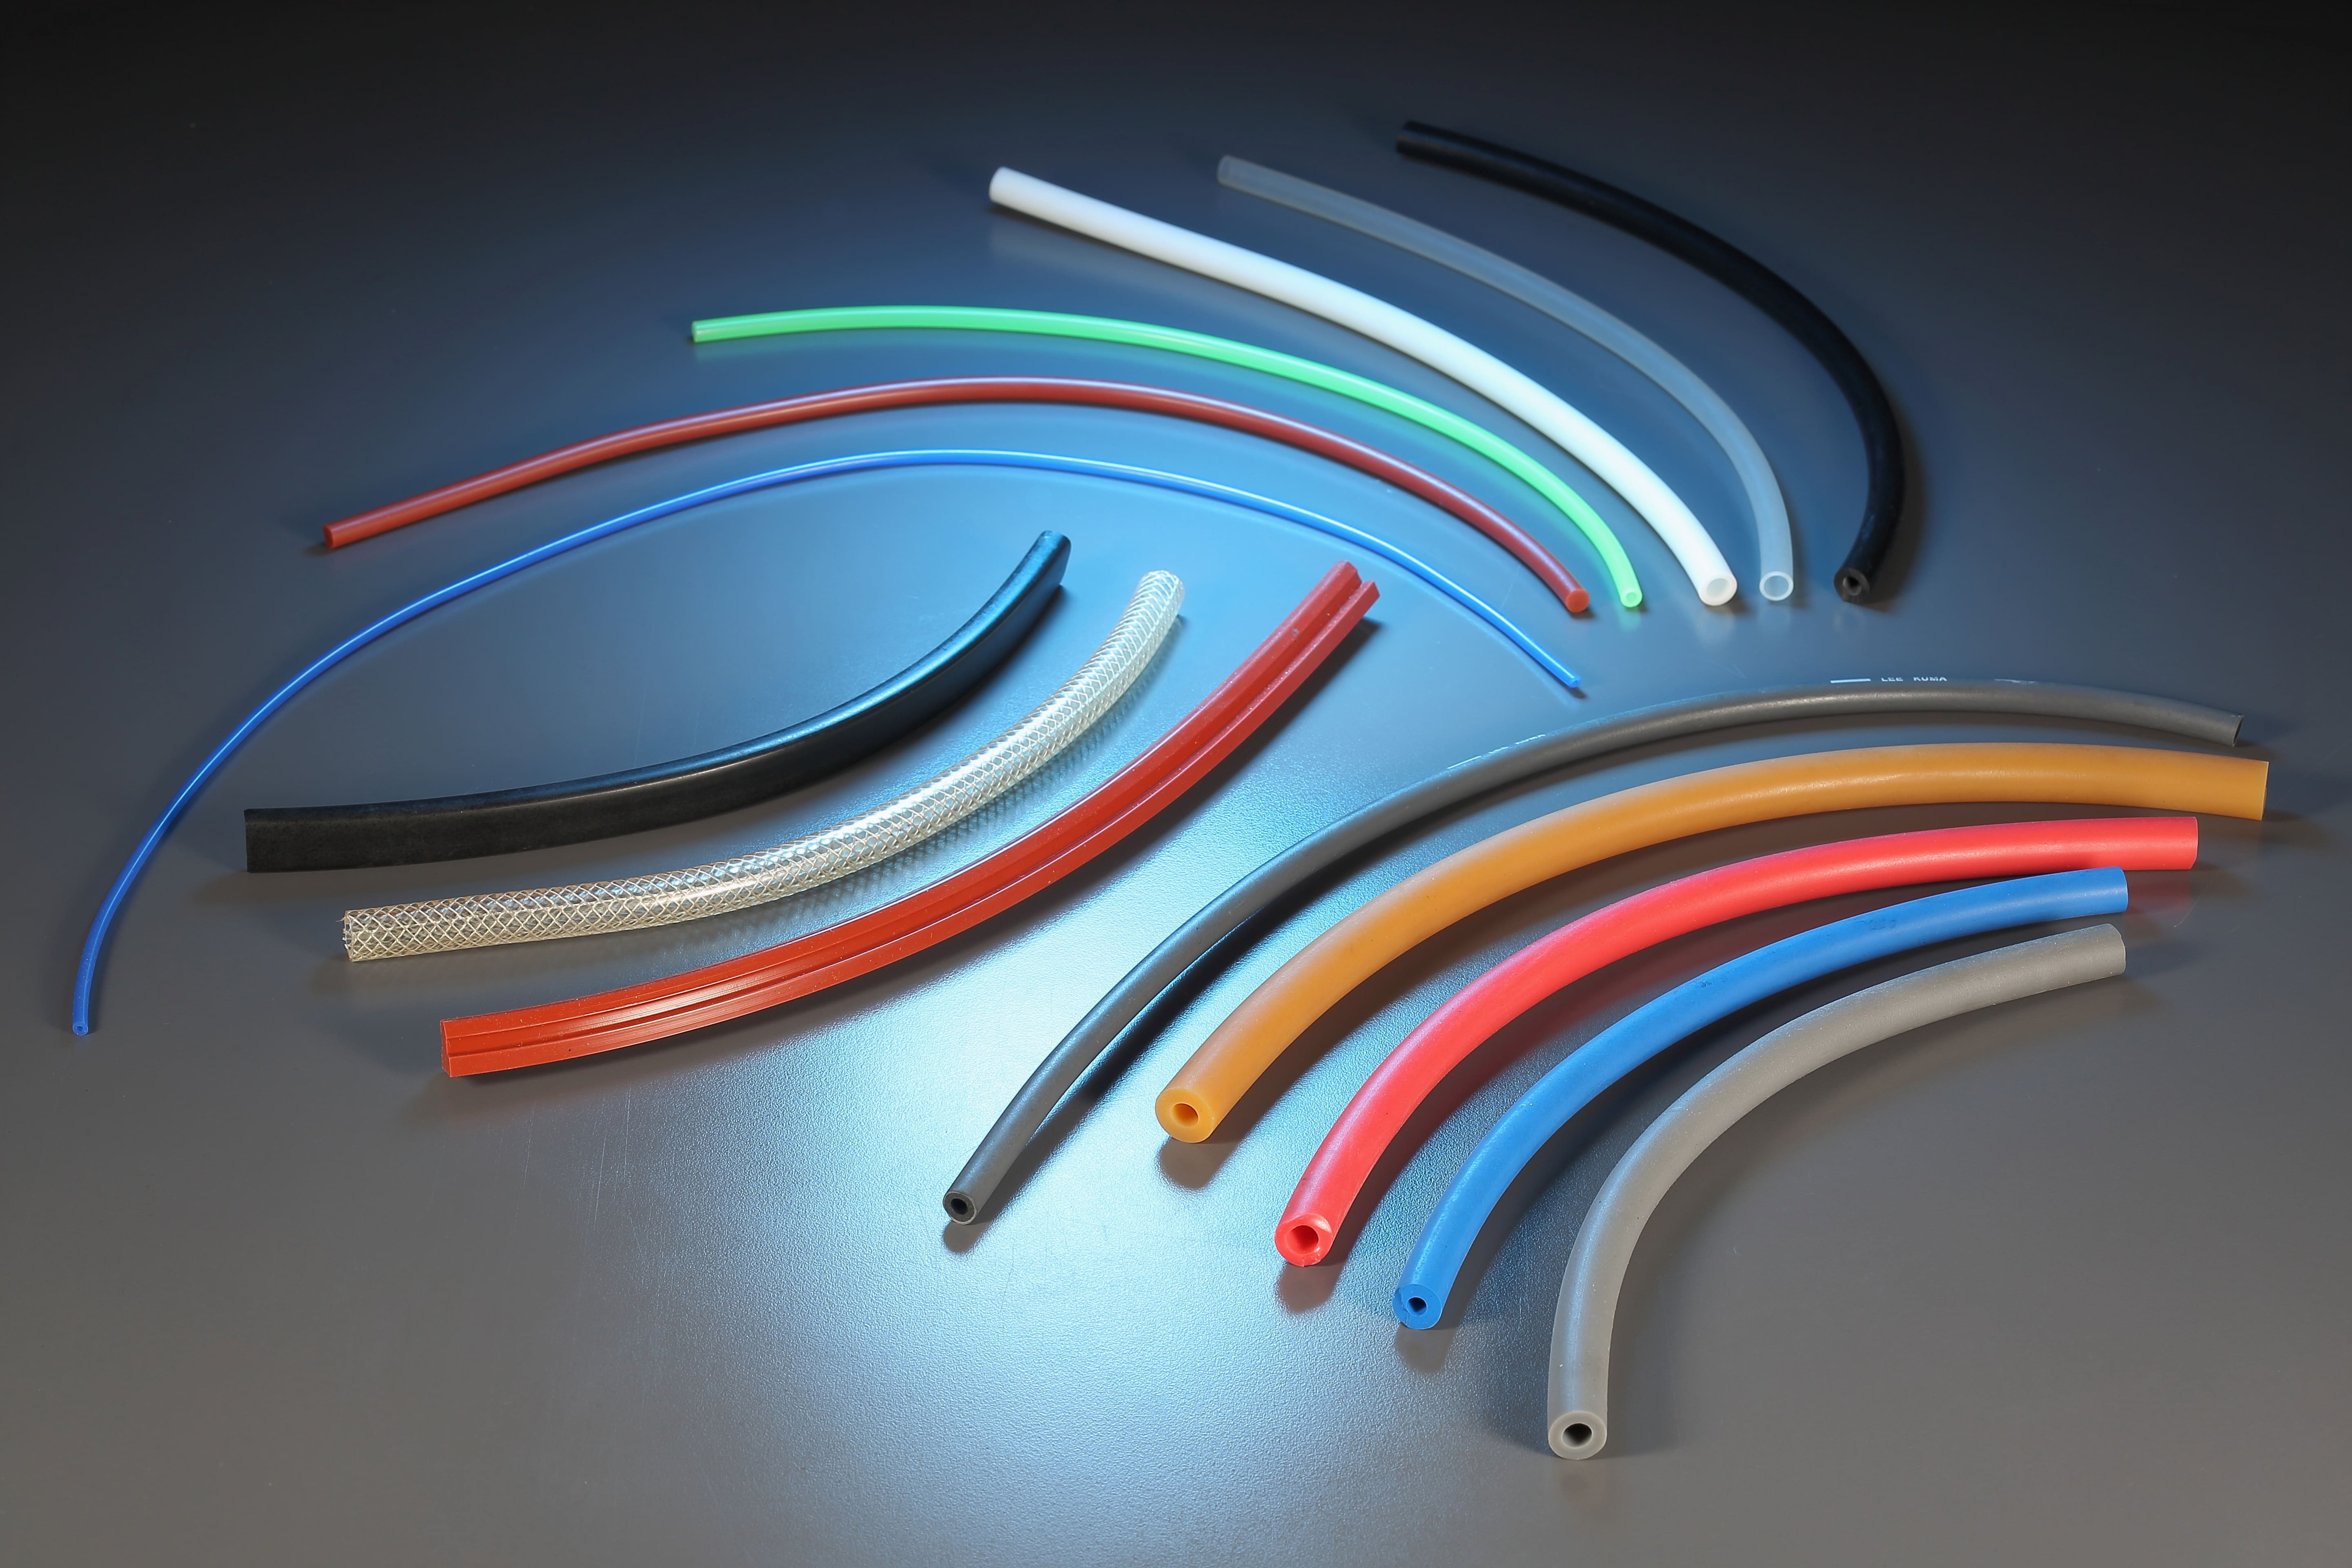 Automobile Vehicle Rubber Strip for Rubber, Plastic Parts made by Yee Ming Ying Co., LTD.　昱銘穎有限公司 - MatchSupplier.com